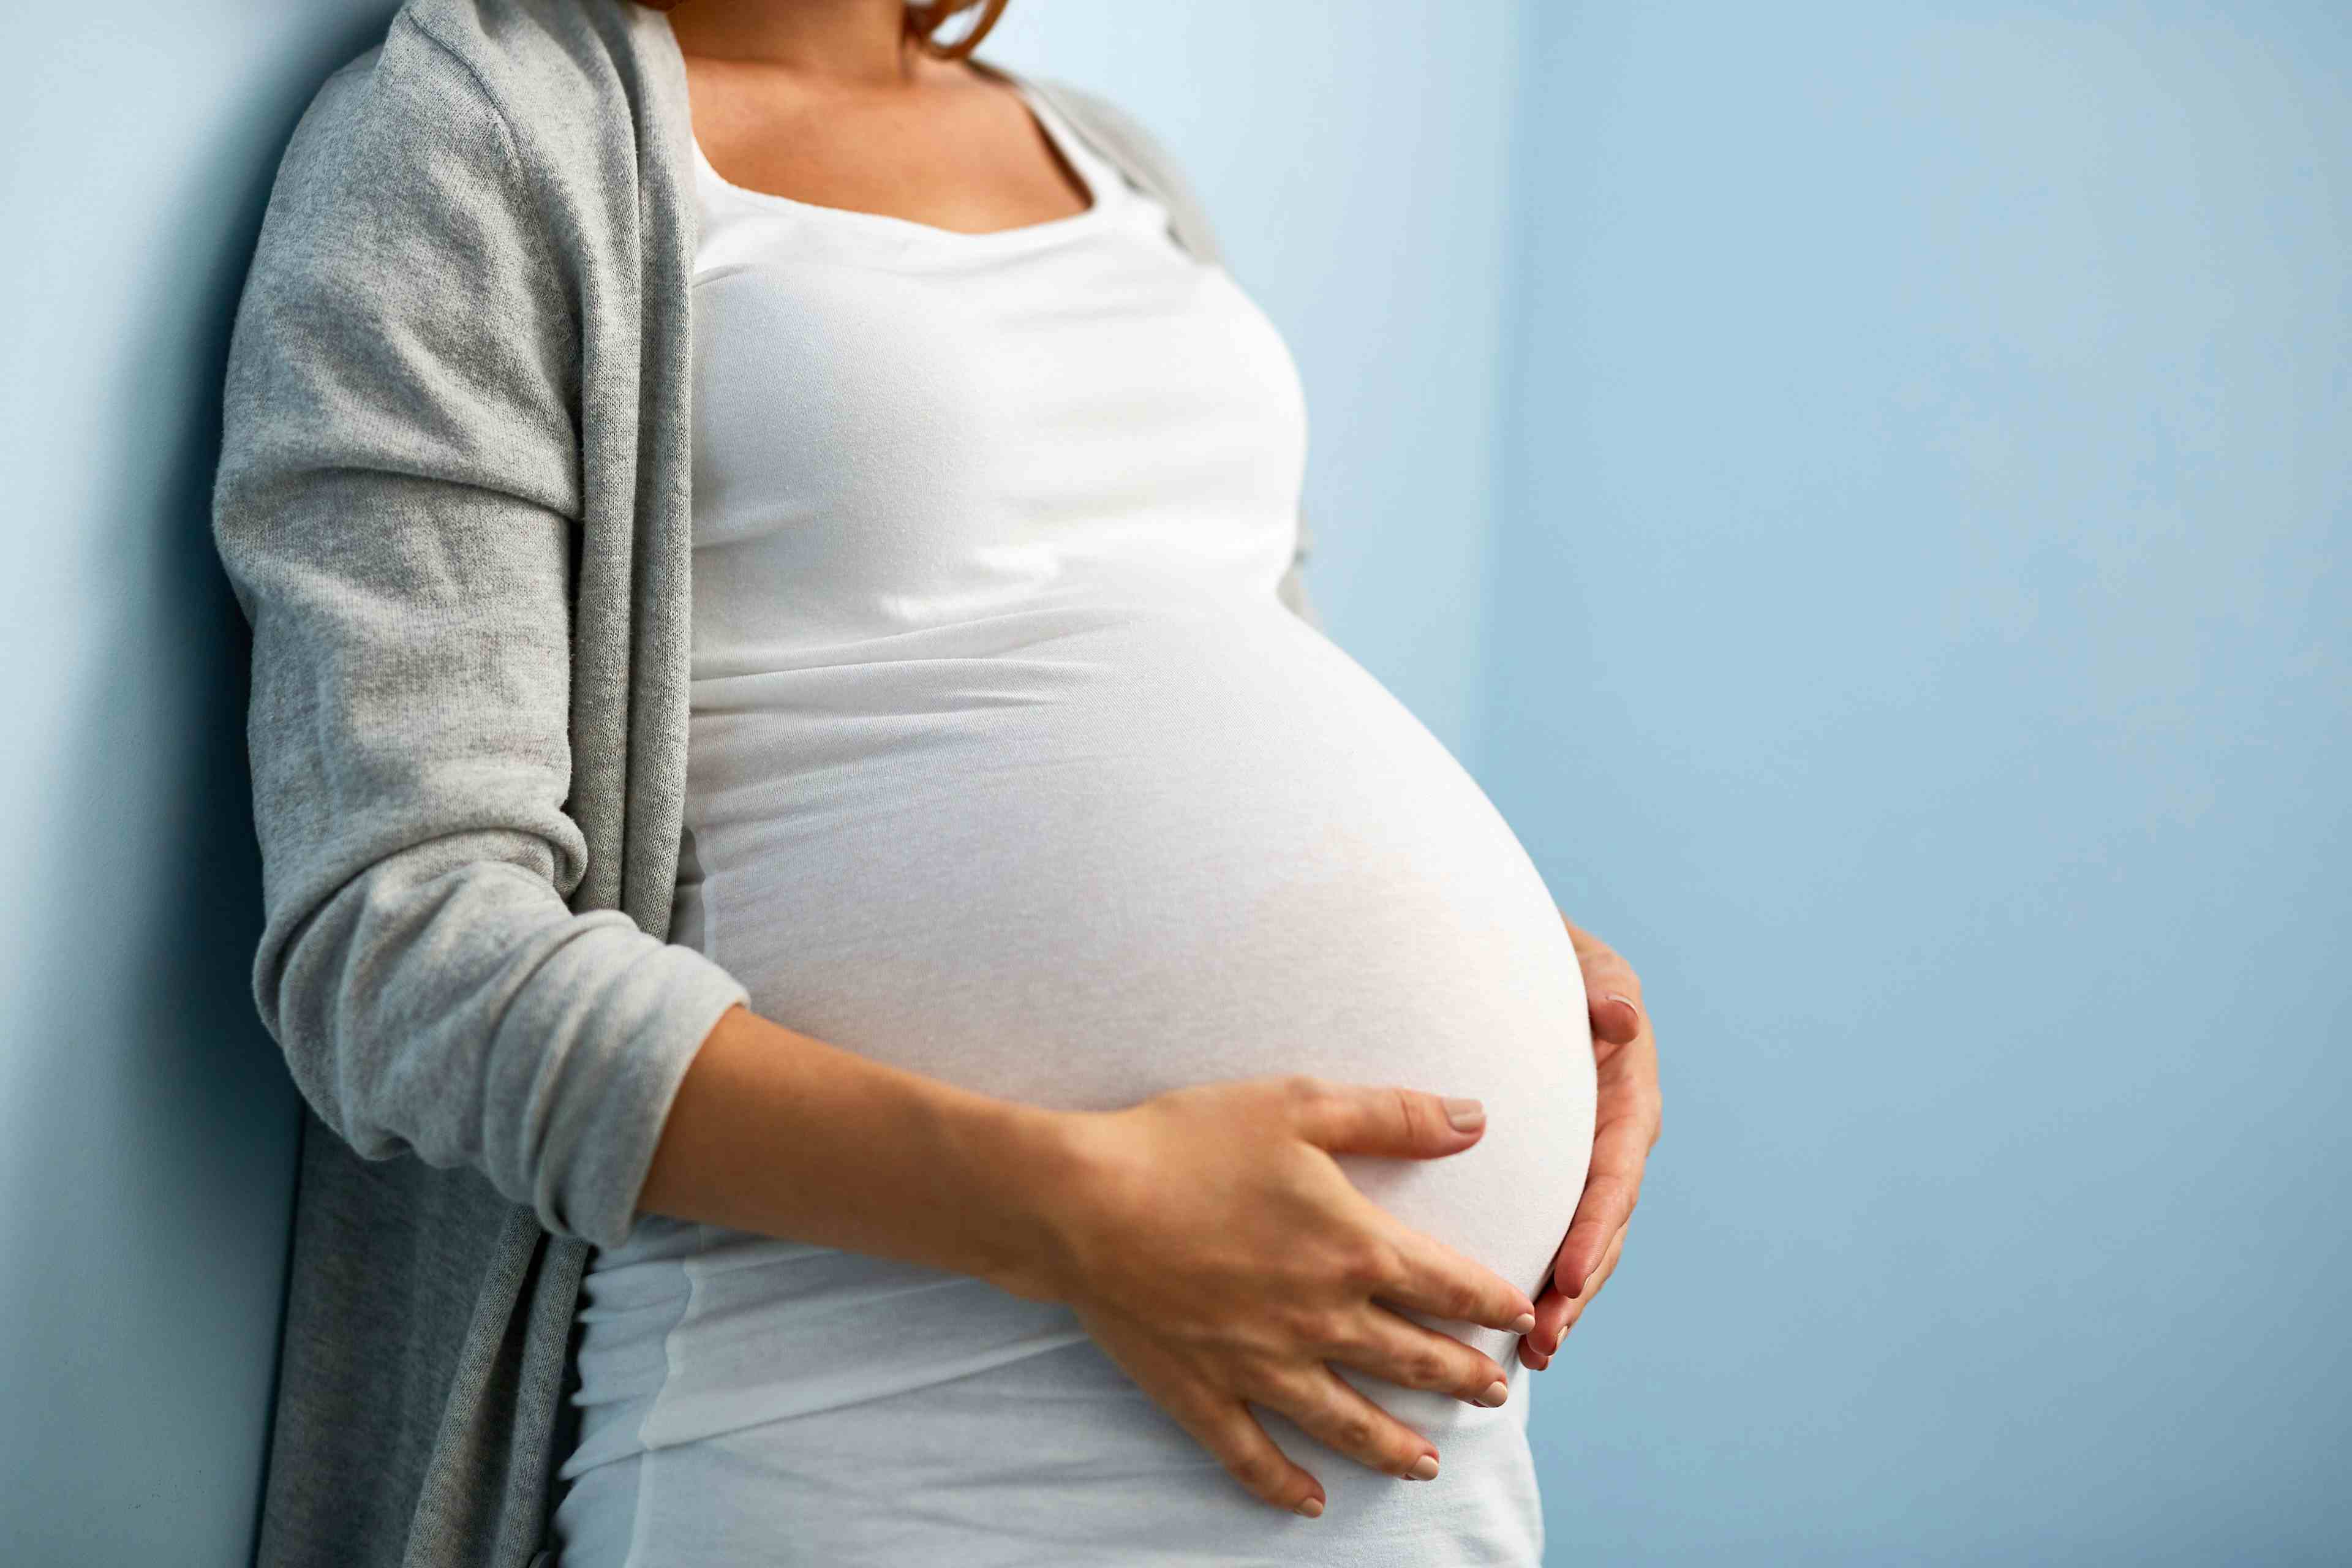 Mid-section portrait of unrecognizable woman during last months of pregnancy holding her big belly gently standing against wall in blue room - Image credit: pressmaster | stock.adobe.com